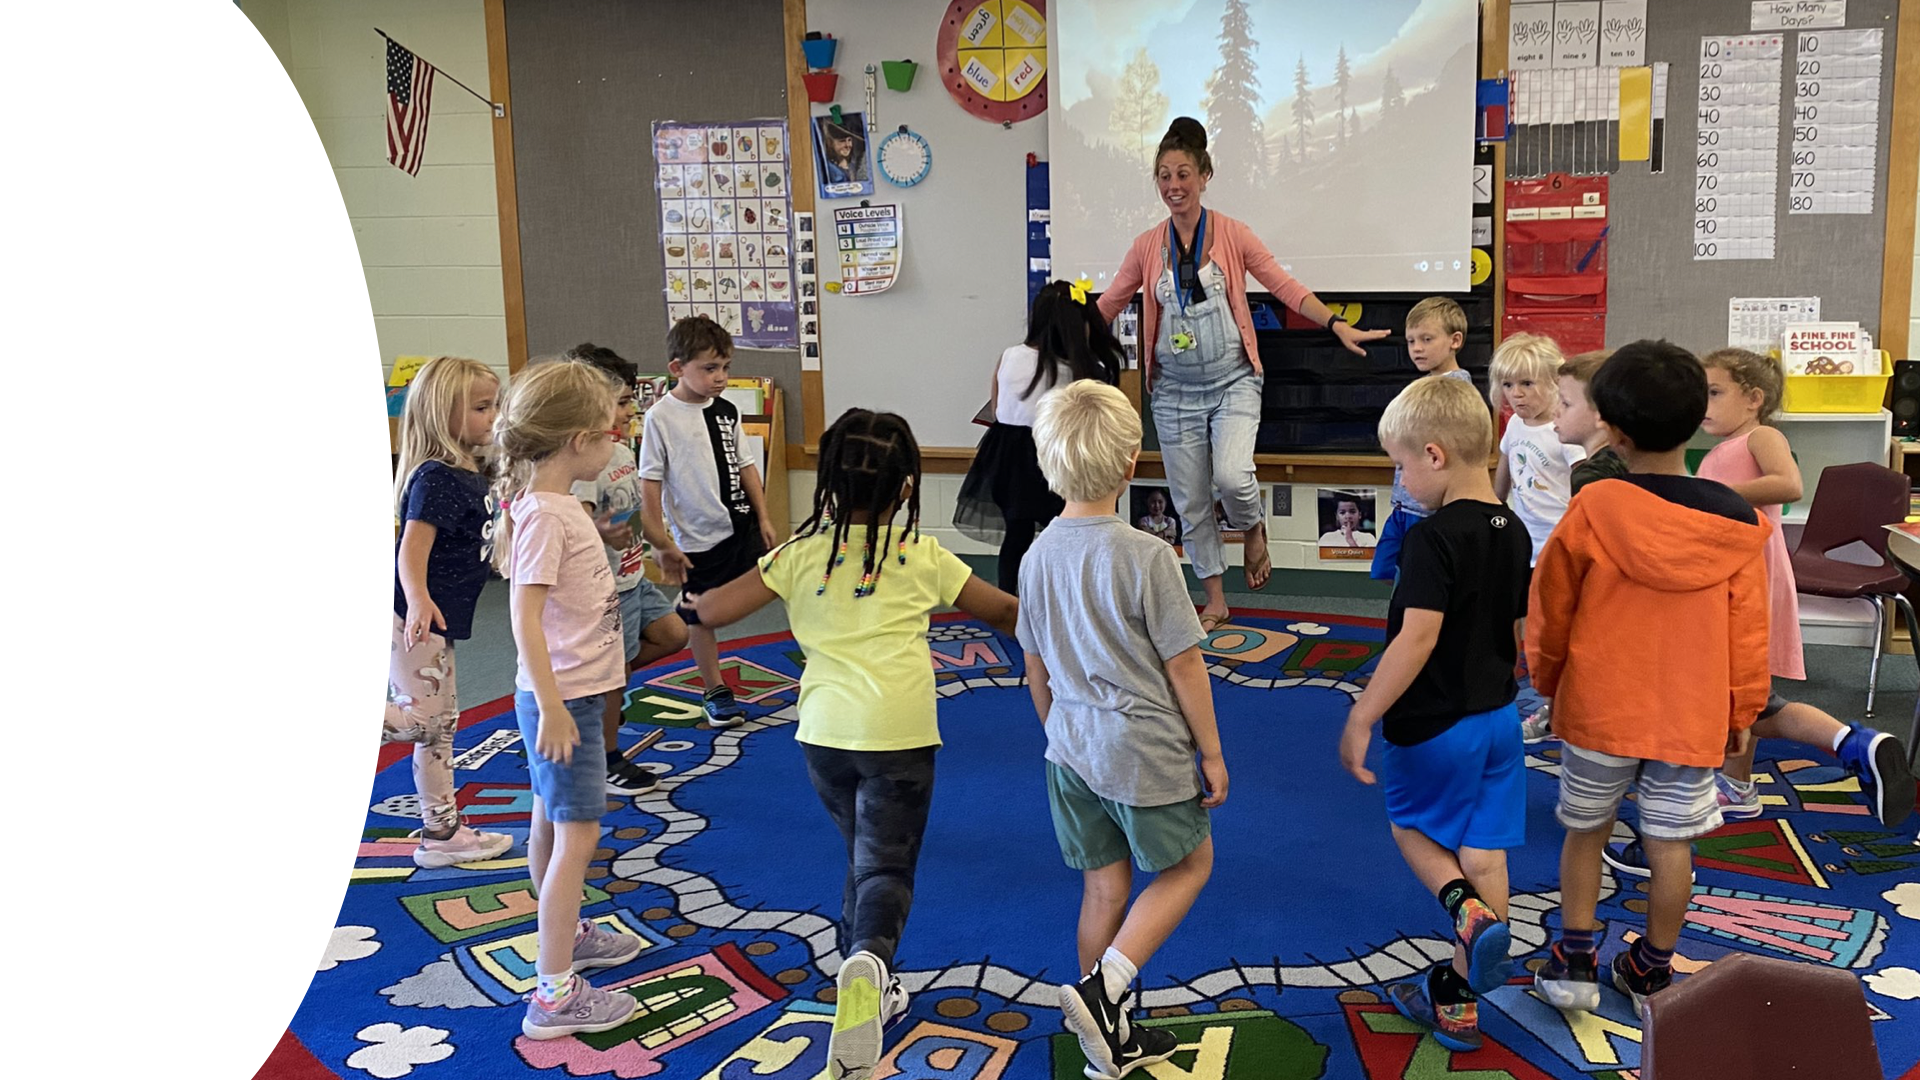 An educator in a messy bun and overalls leads a circle of students in a stretching exercise in a cozy classroom